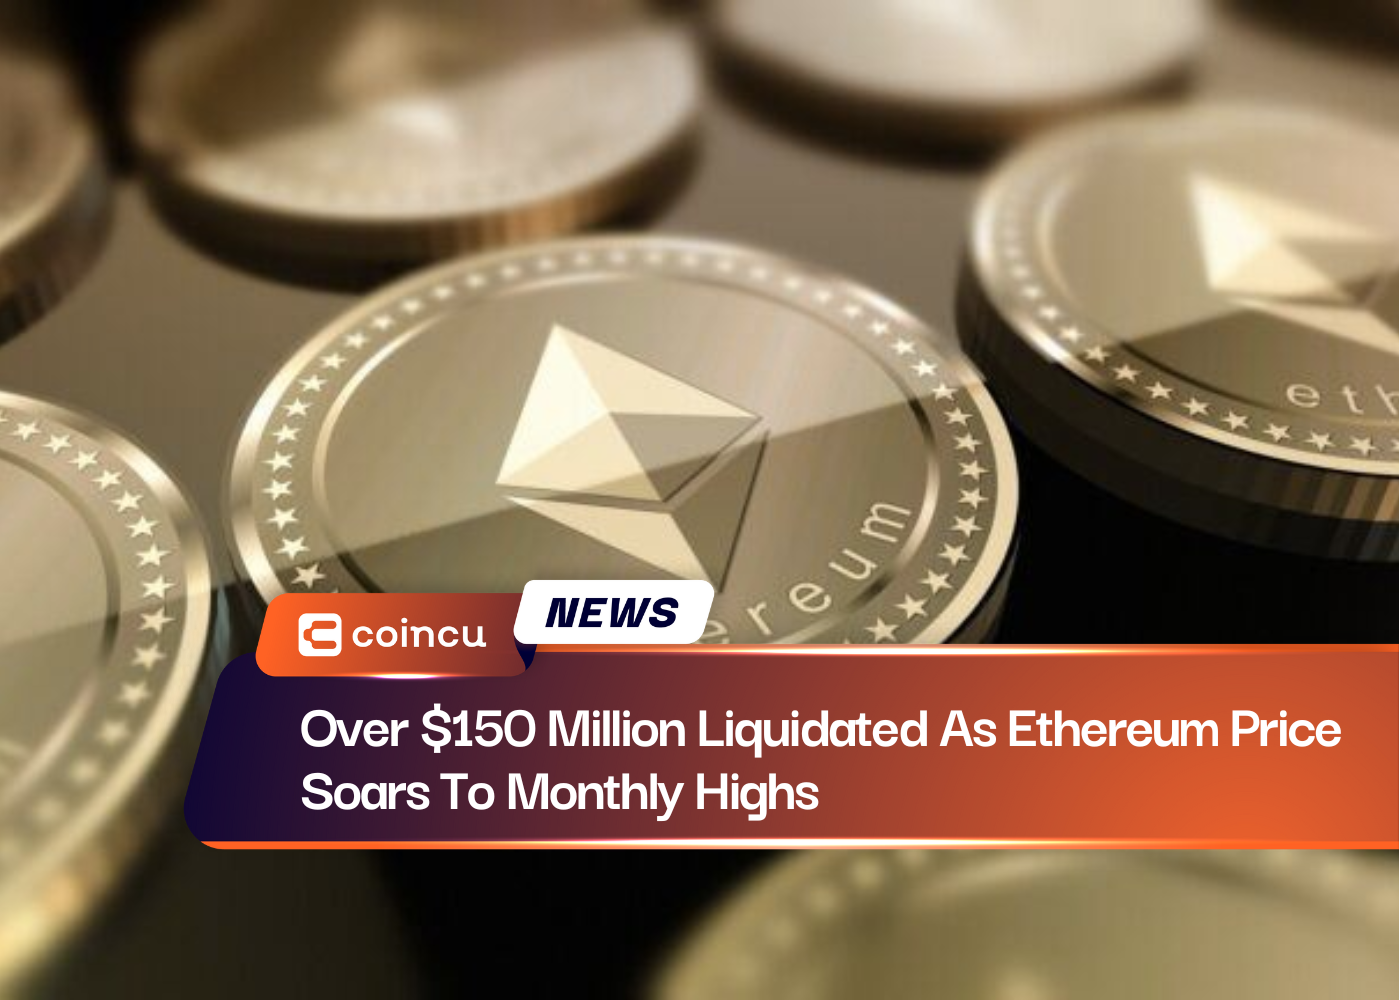 Over $150 Million Liquidated As Ethereum Price Soars To Monthly Highs